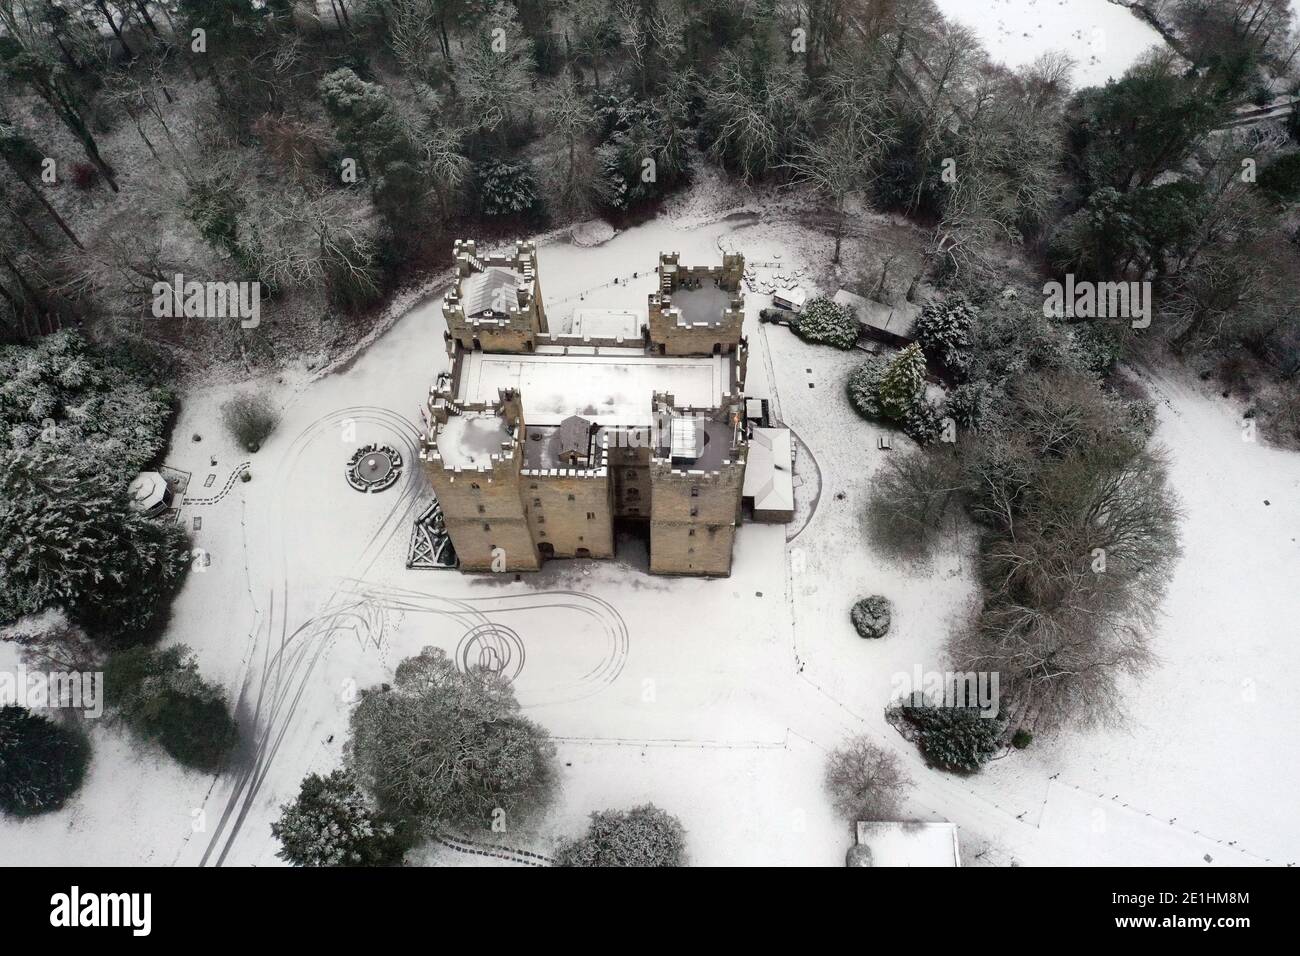 Snow covers the grounds surrounding Langley Castle Hotel near Haydon Bridge, Northumberland, a medieval tower house built in the 14th century. Stock Photo